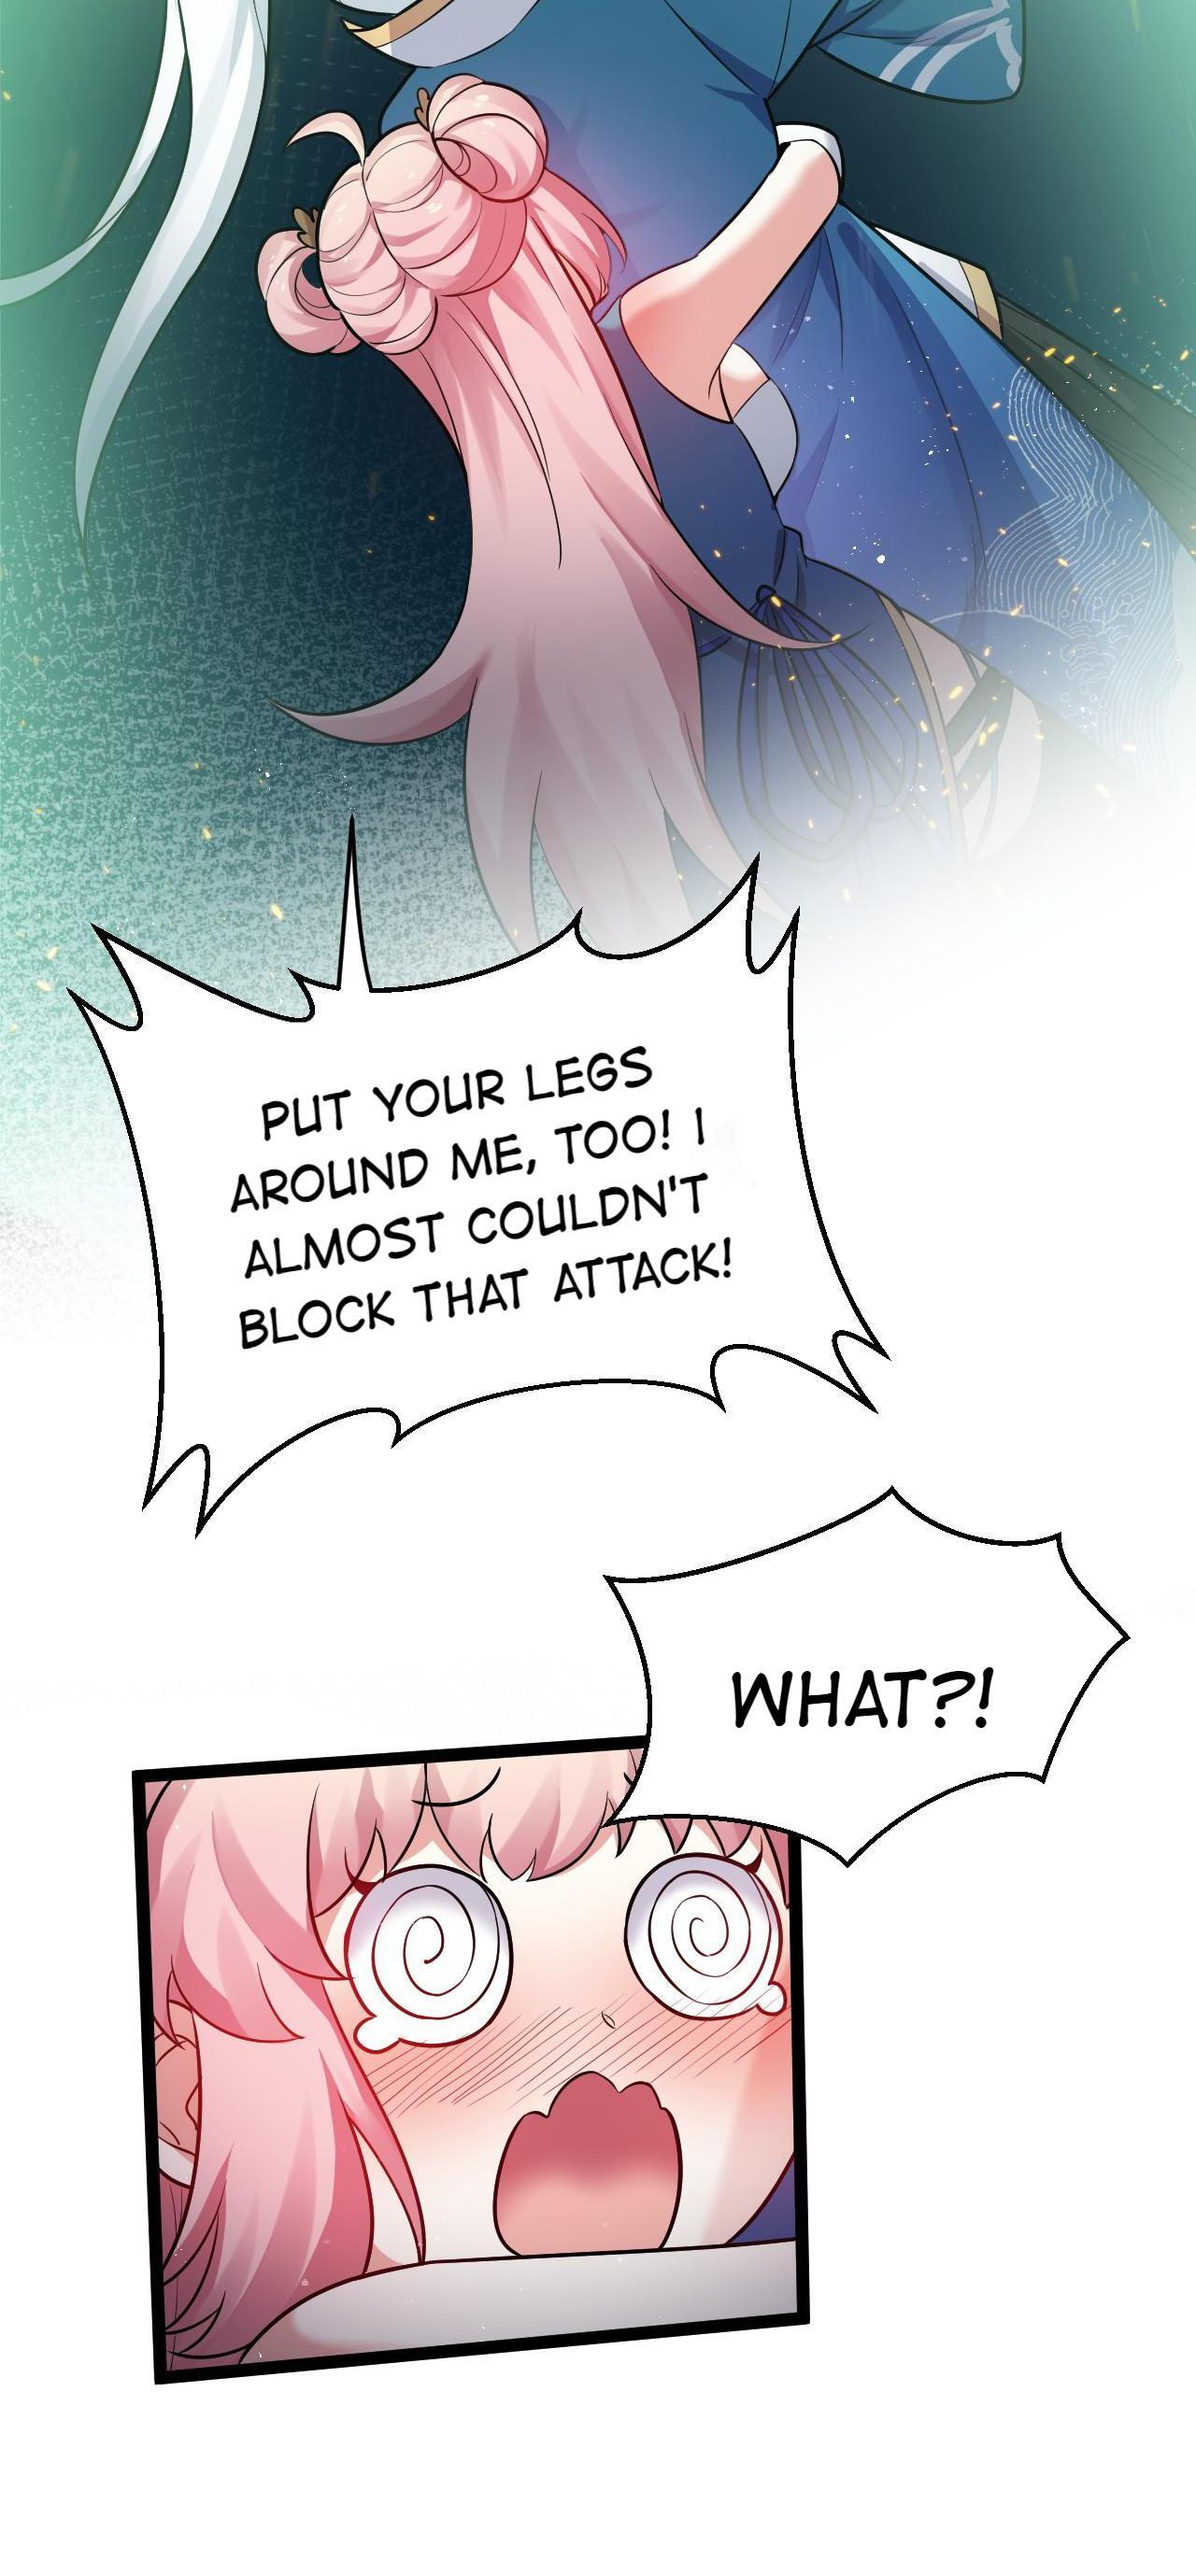 Please Spare Me! Apprentice! Chapter 15 - MyToon.net